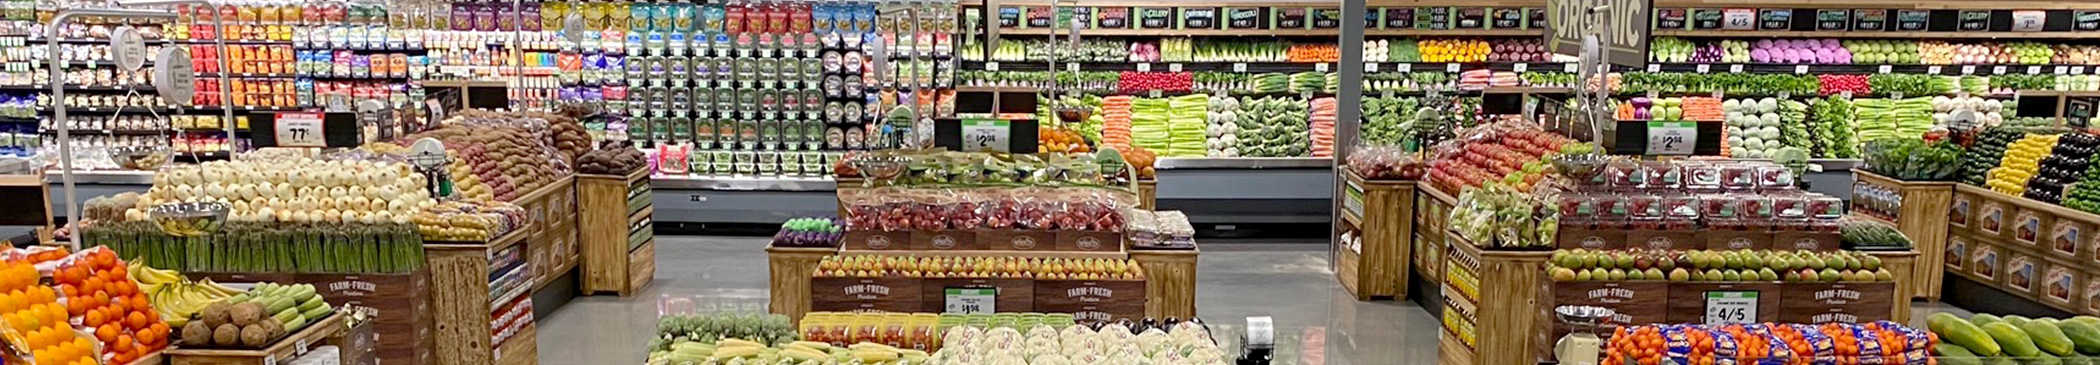 Sprouts Farmers Market Produce Department